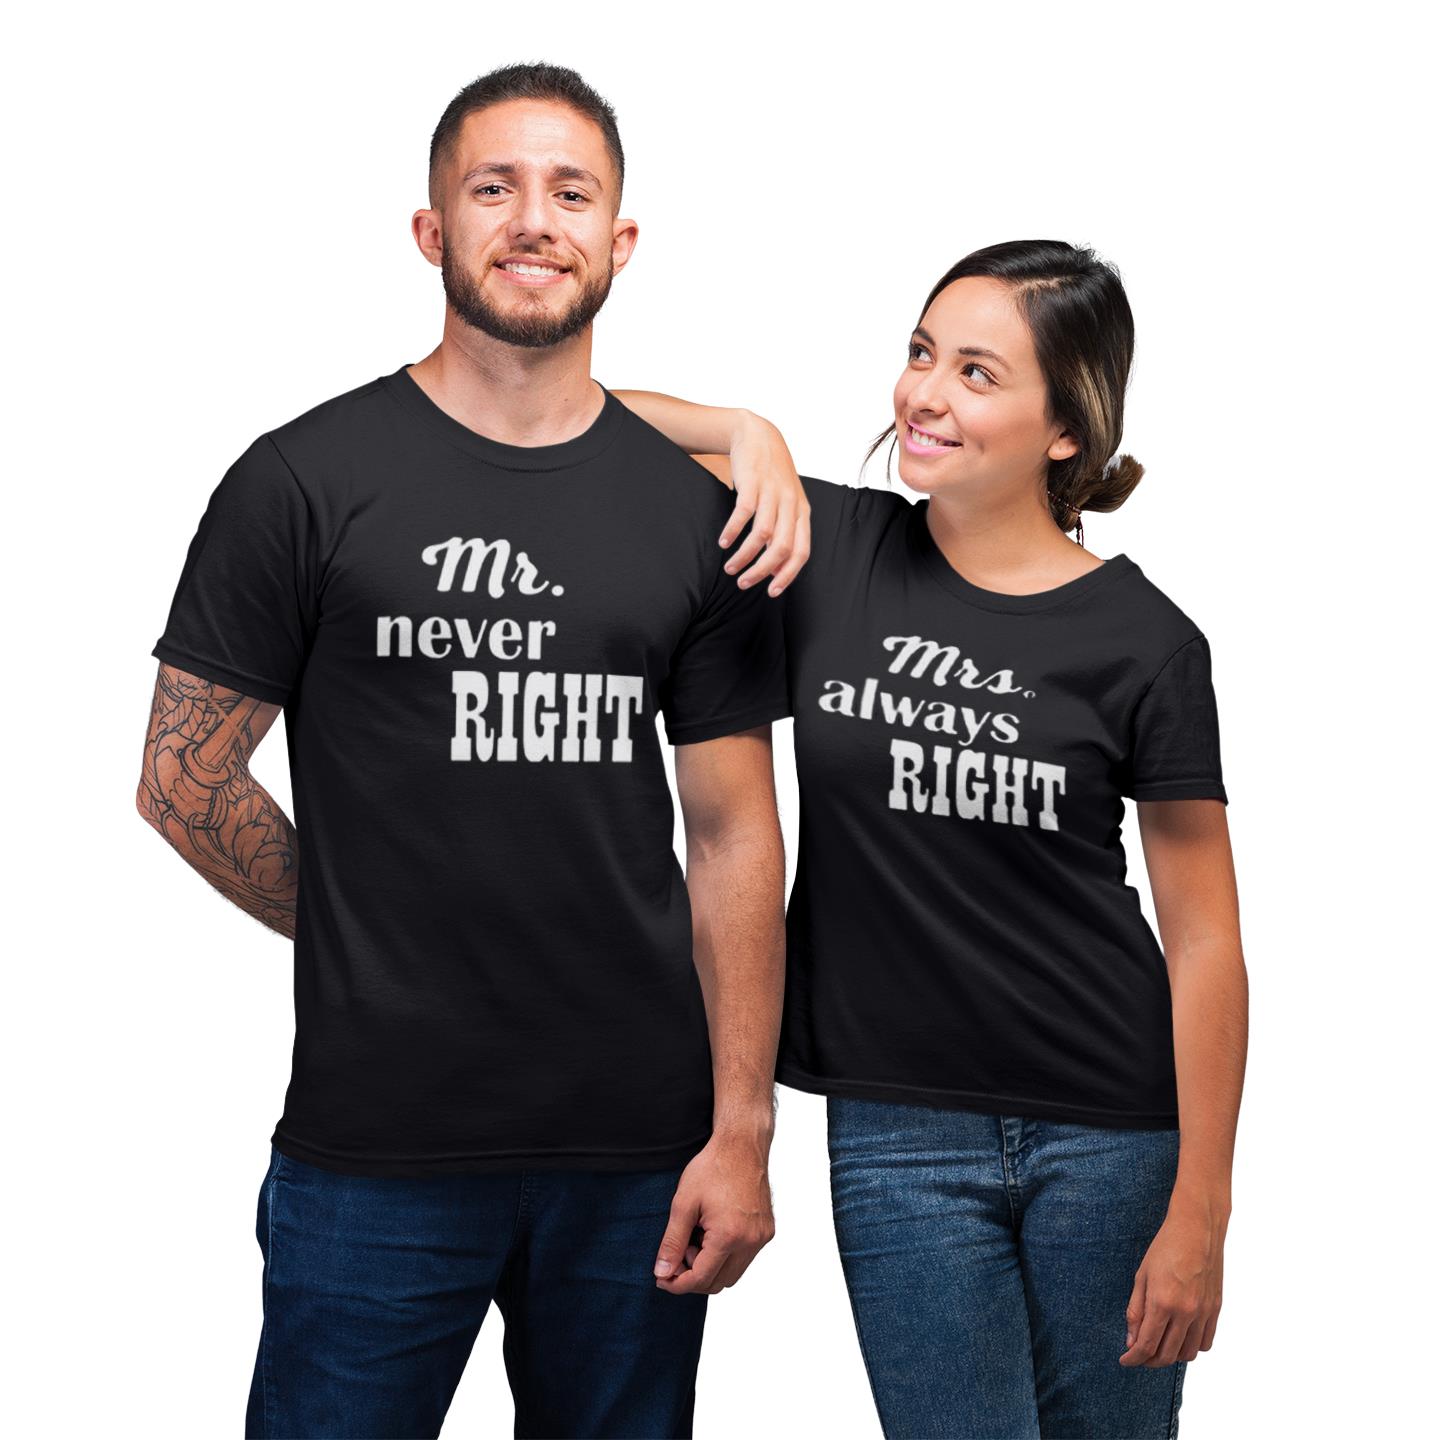 Mr Mrs Right Funny Shirt For Couple Matching His And Hers T-shirt